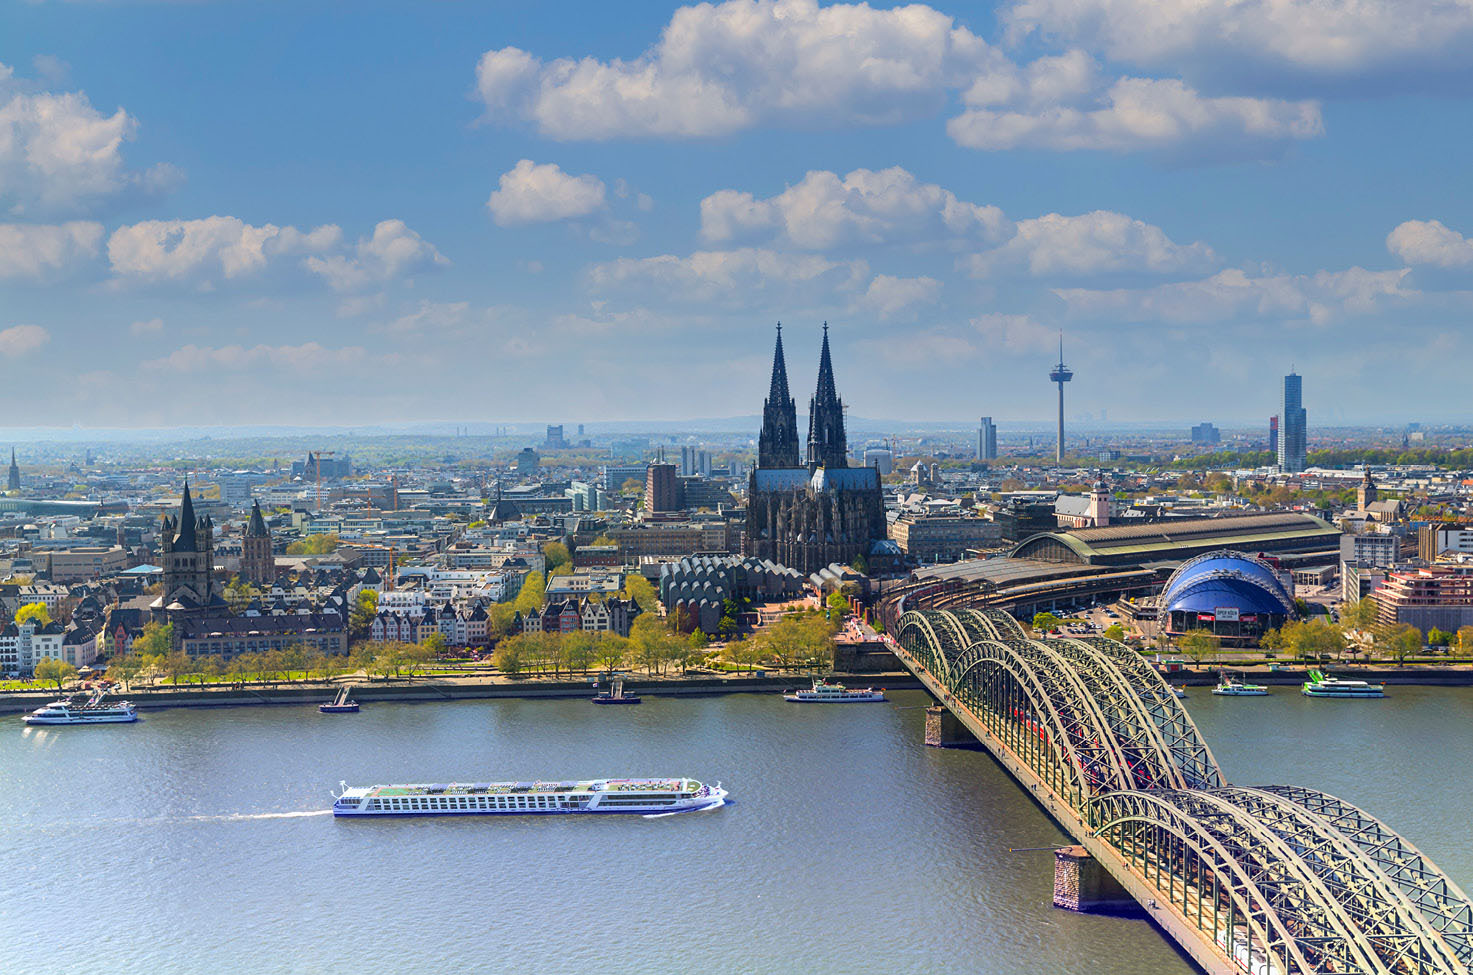 Luxury river ship sailing along the Rhine River through Cologne past the Kölner Dom